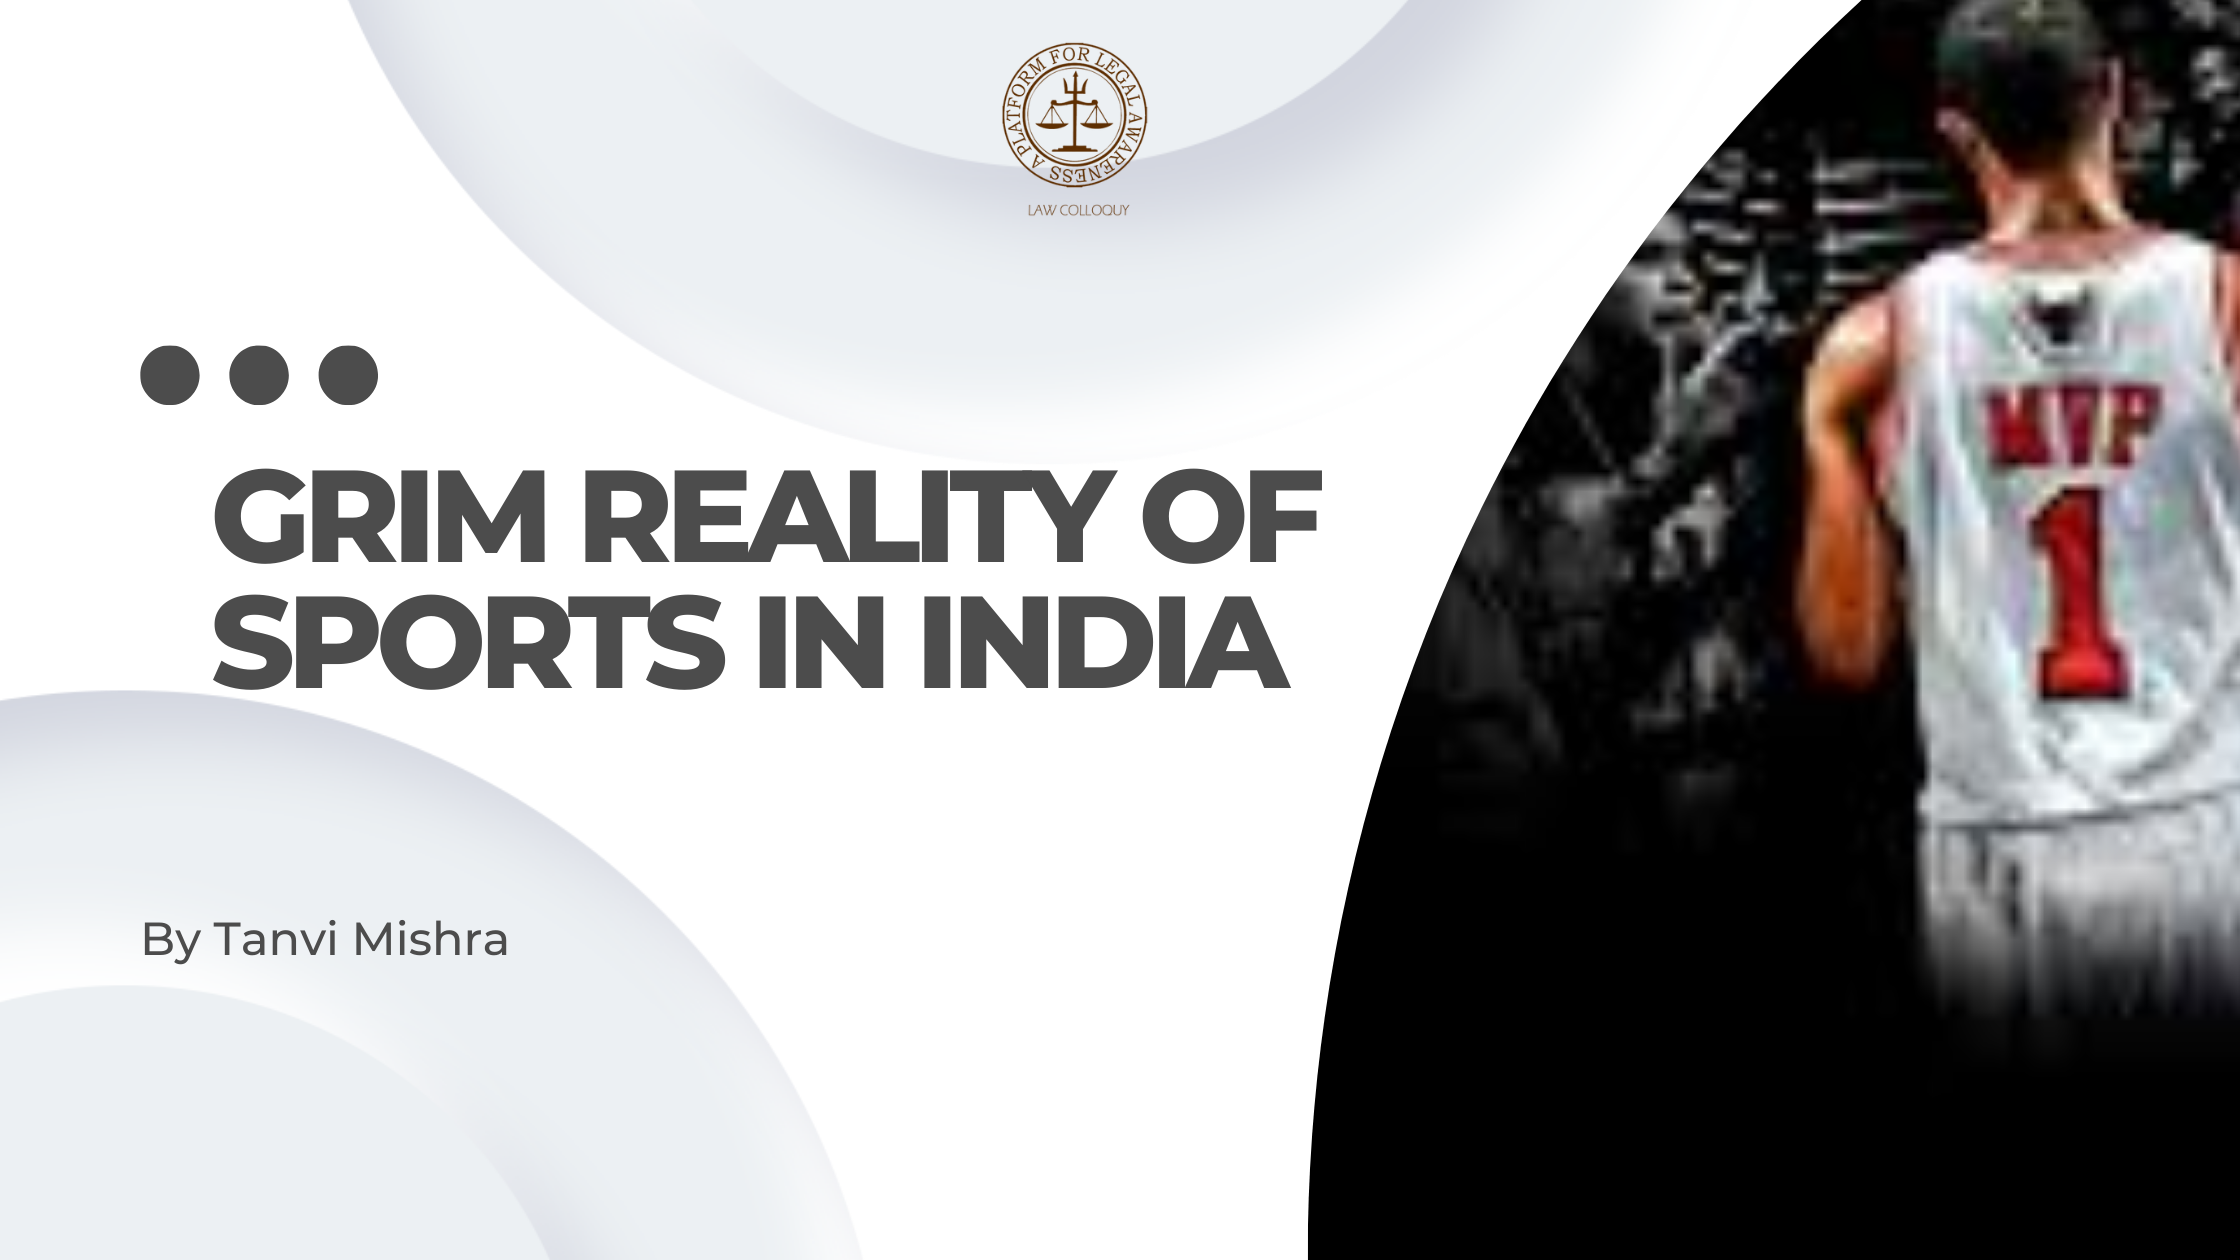 GRIM REALITY OF SPORTS IN INDIA